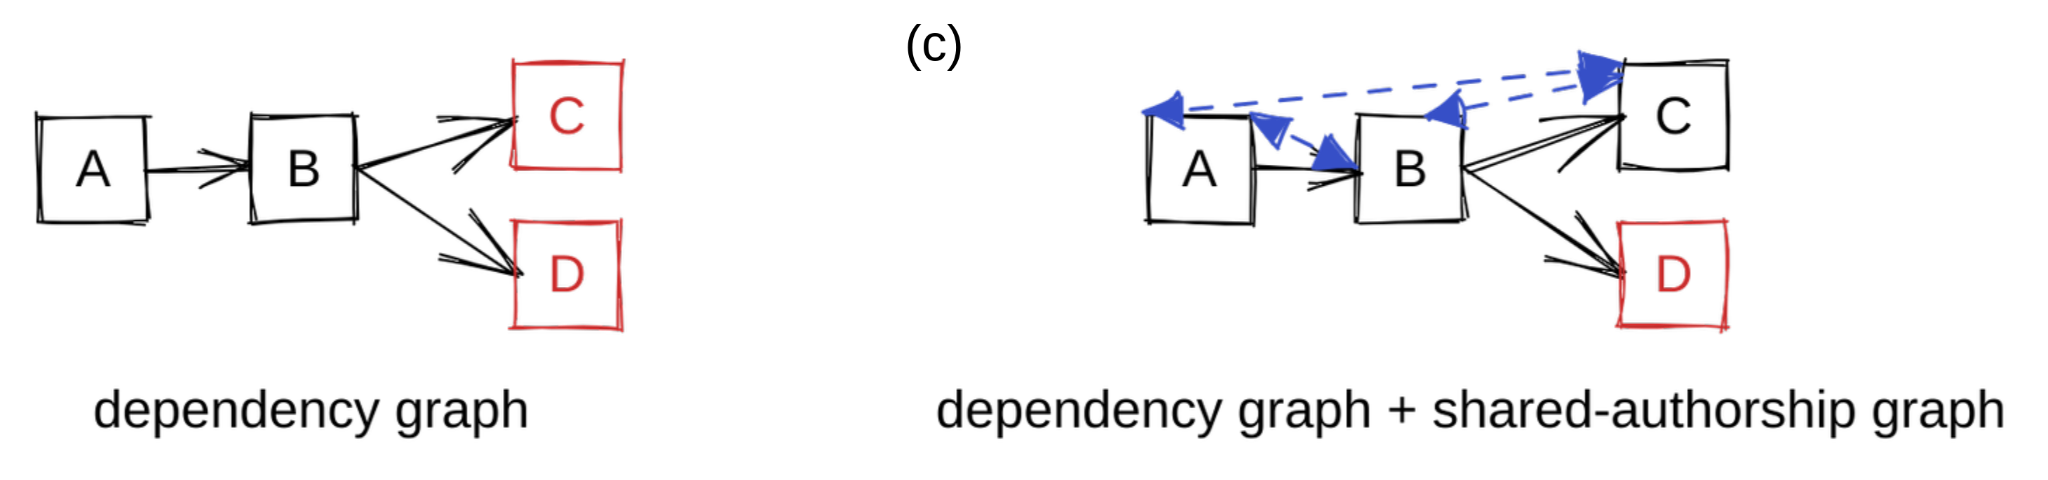 Augmented Dependency Graph